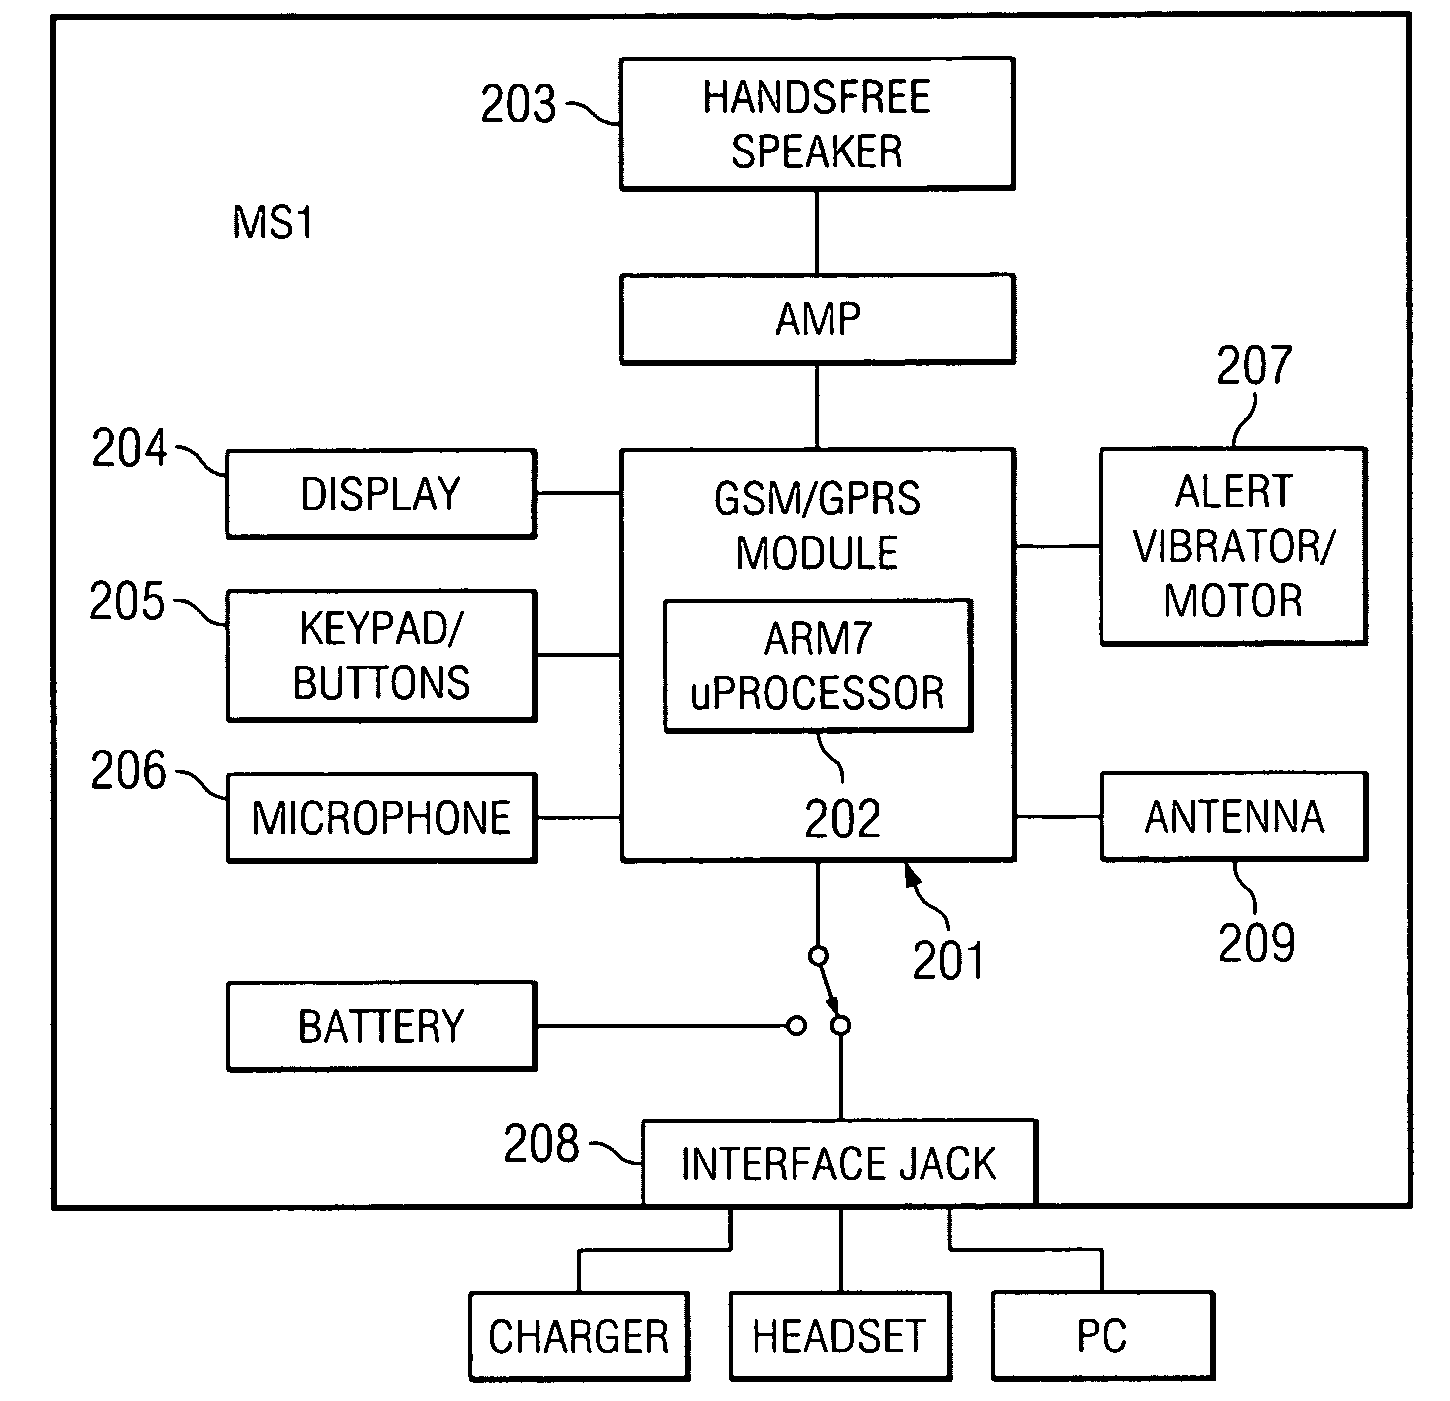 Controlling the use of a wireless mobile communication device